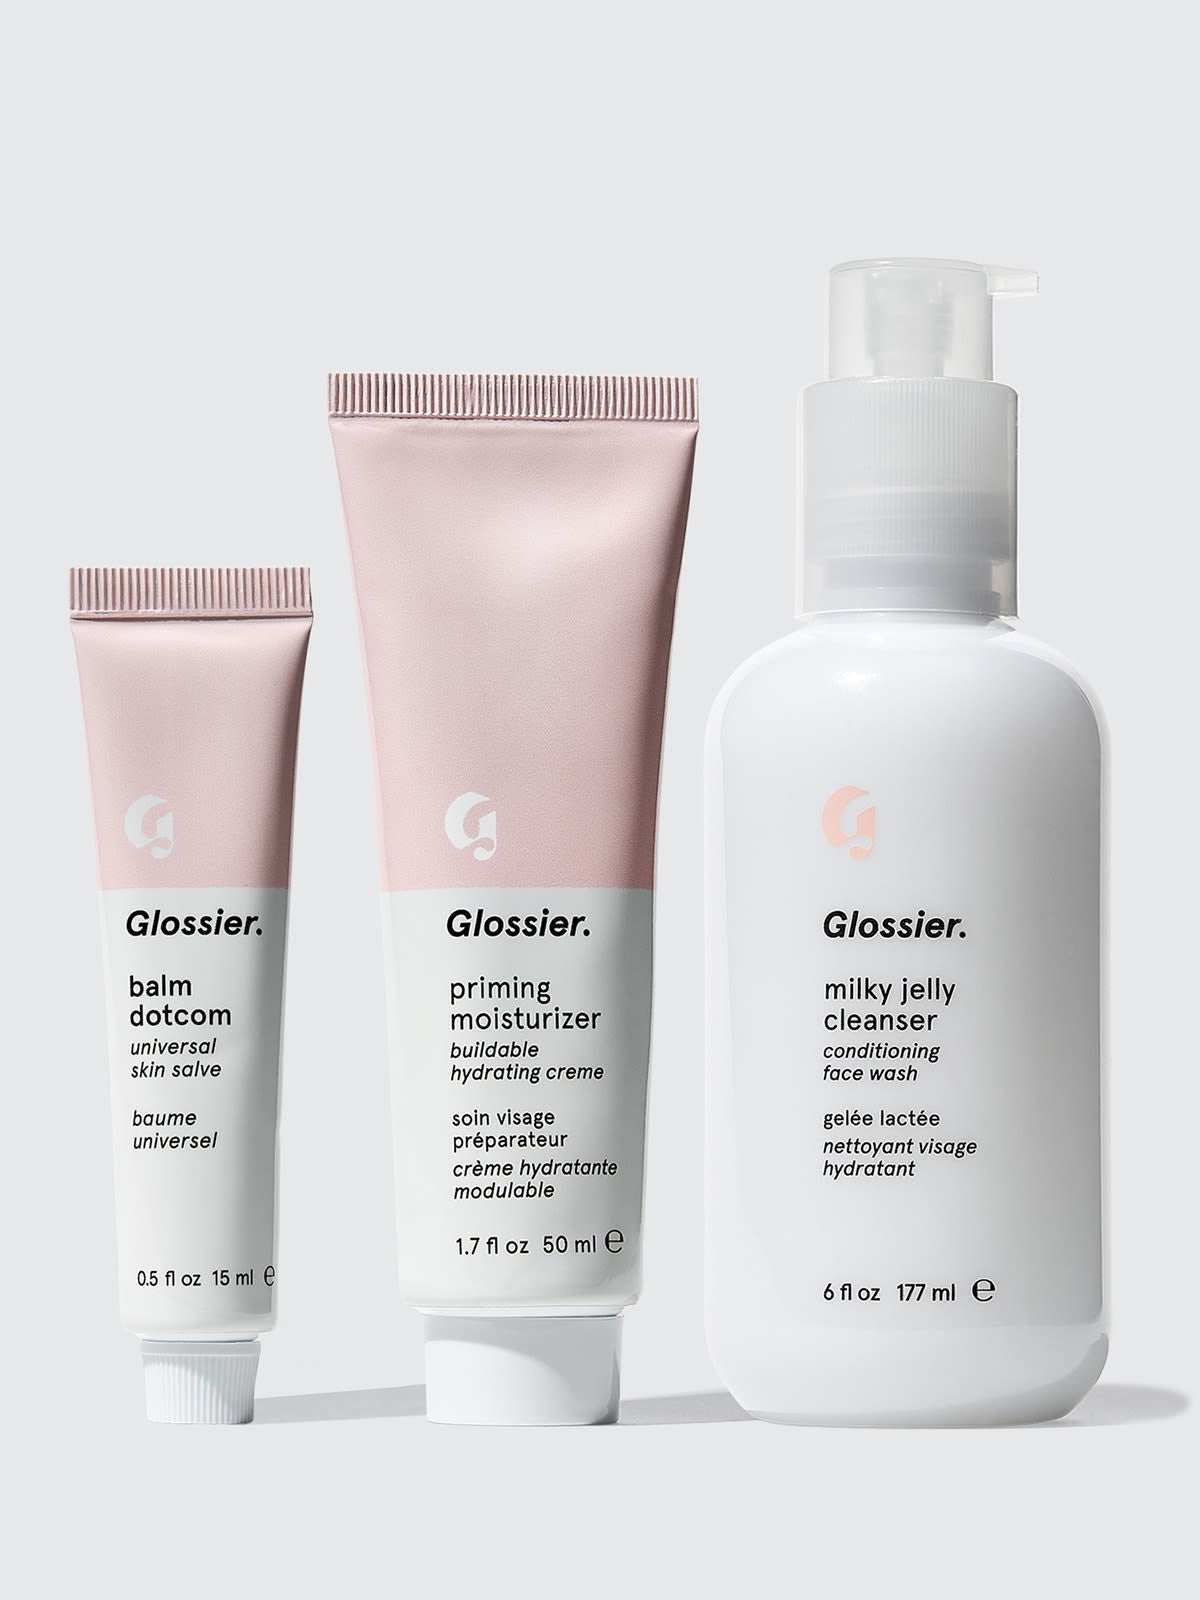 Glossier’s Black Friday Sale Is Actually Starting Now